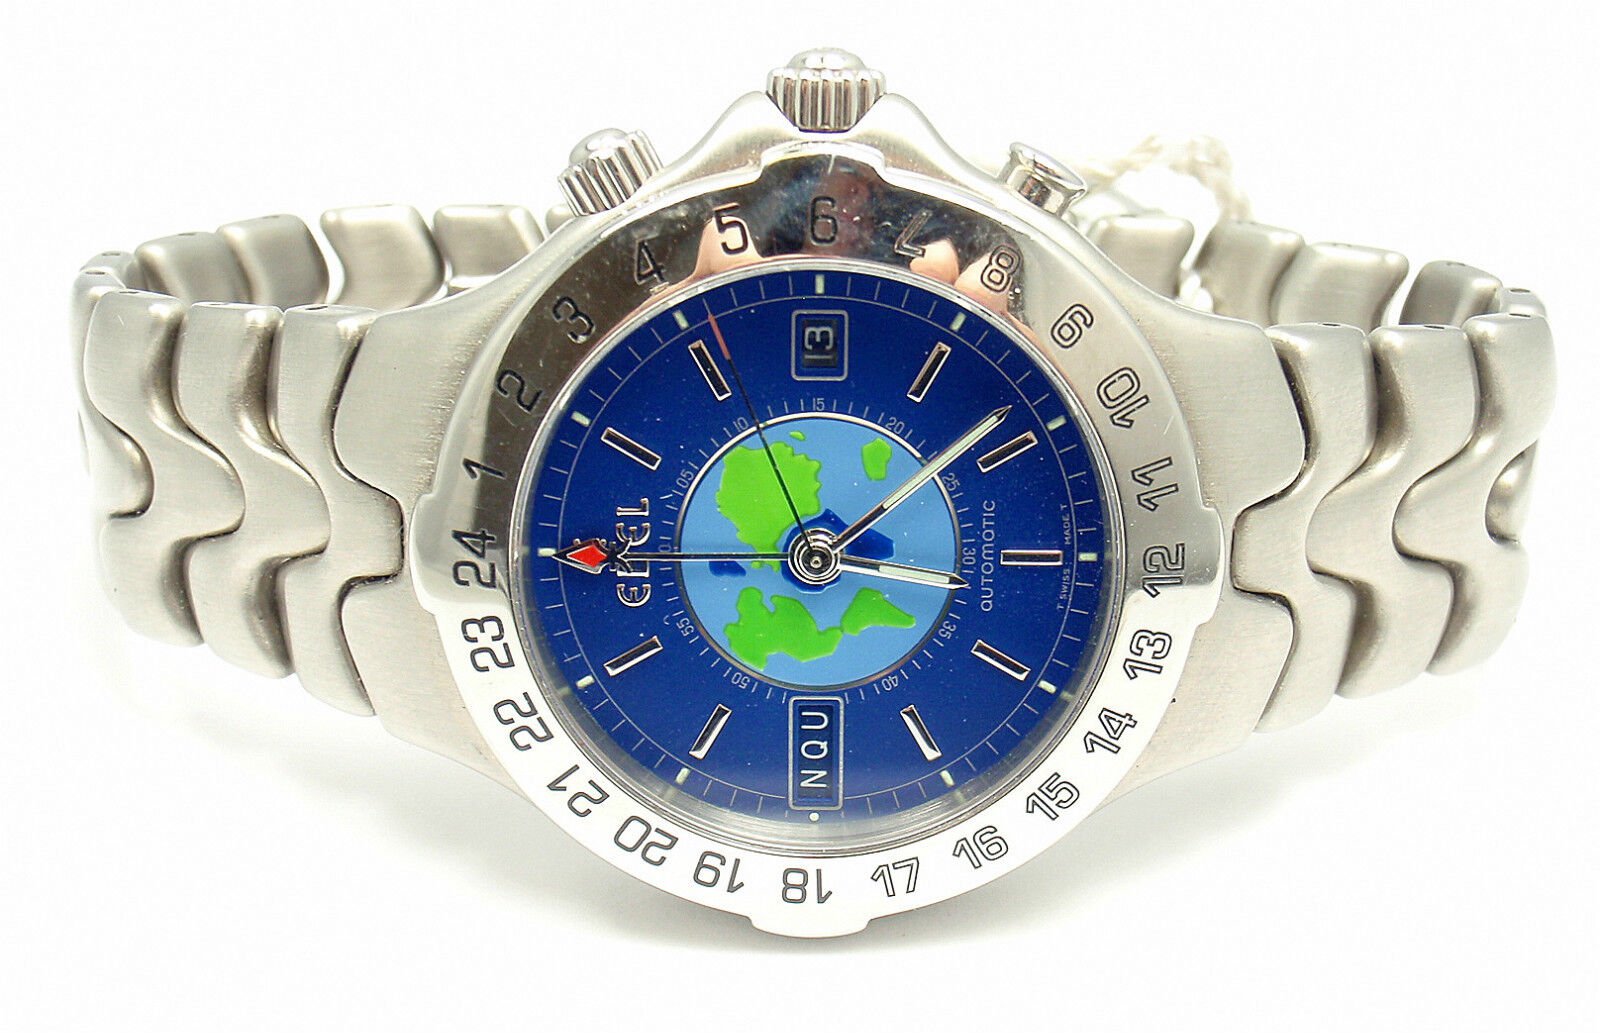 Ebel Jewelry & Watches:Watches, Parts & Accessories:Watches:Wristwatches SHARP! AUTHENTIC EBEL STAINLESS STEEL BLUE DIAL SPORTWAVE WORLD TIME WATCH